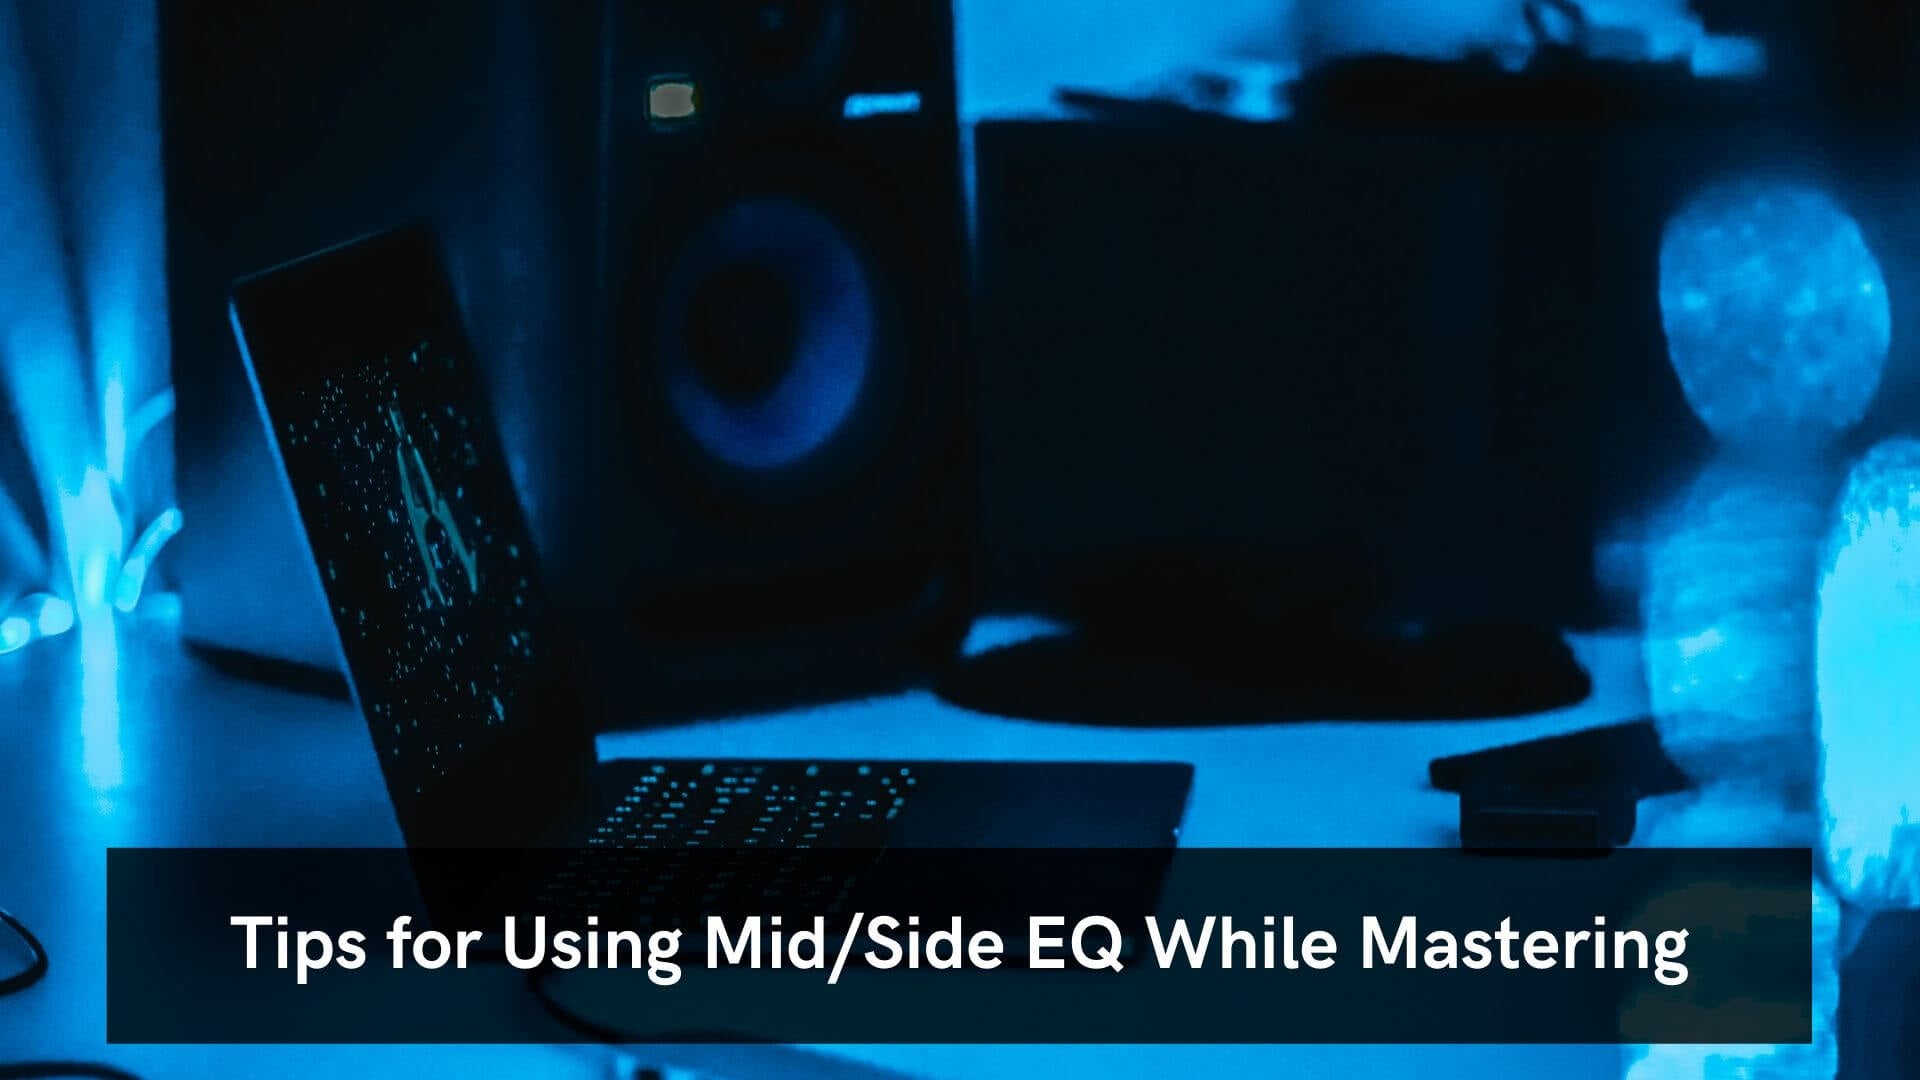 Tips for Using Mid/Side EQ While Mastering